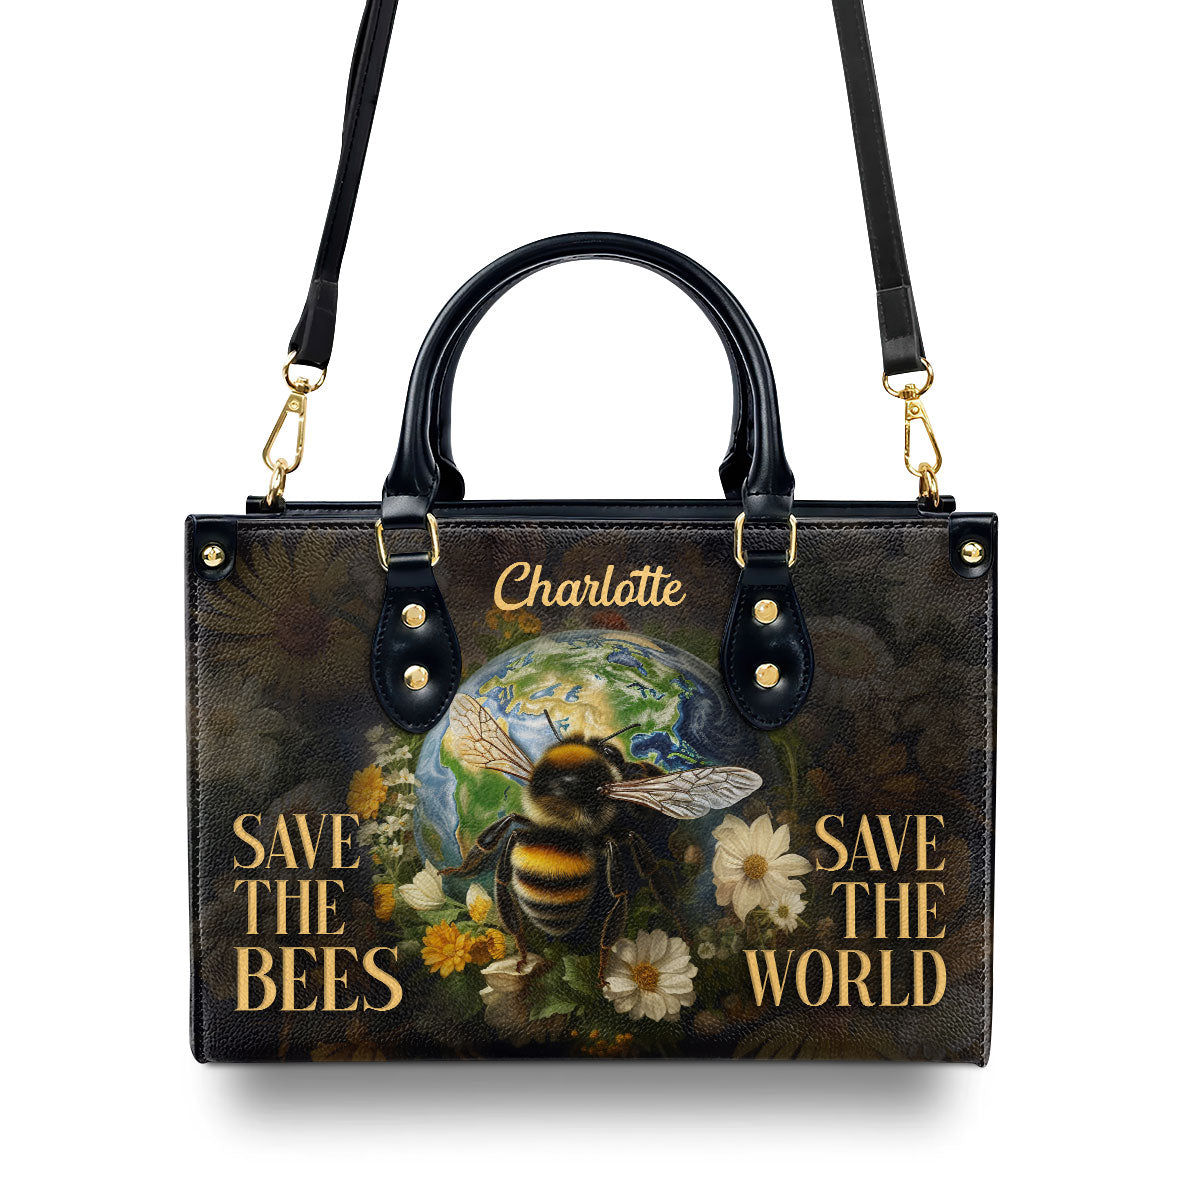 Save The Bees - Personalized Leather Handbag MS-NH1624